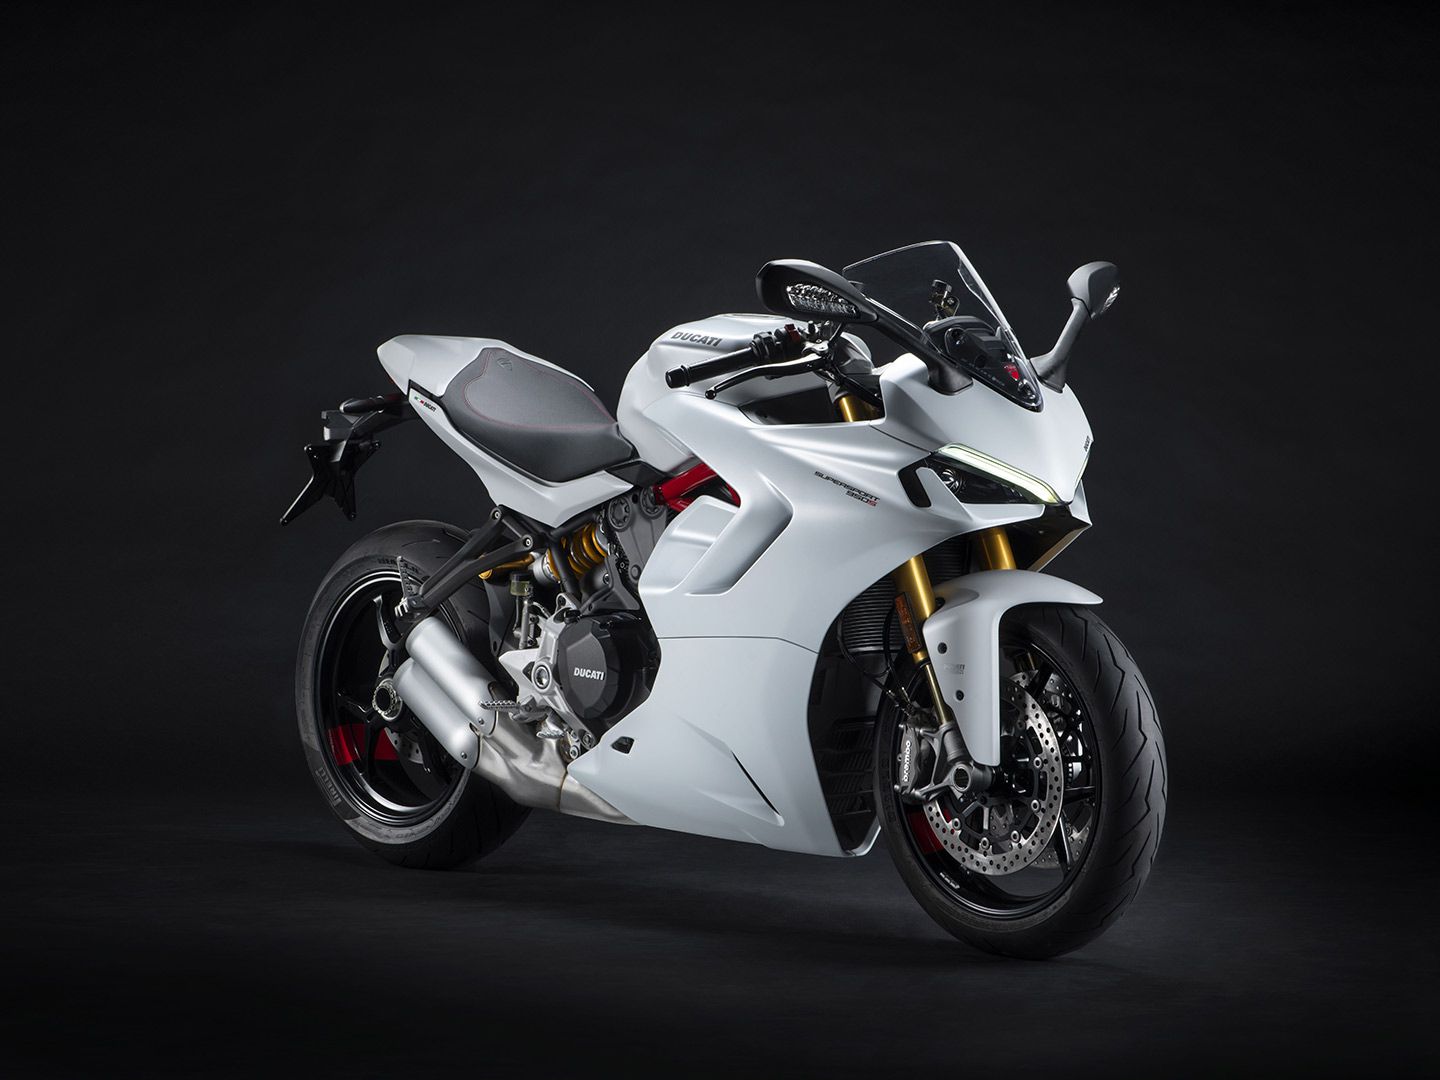 SuperSport S models add Öhlins suspension front and rear, and a passenger seat cover.